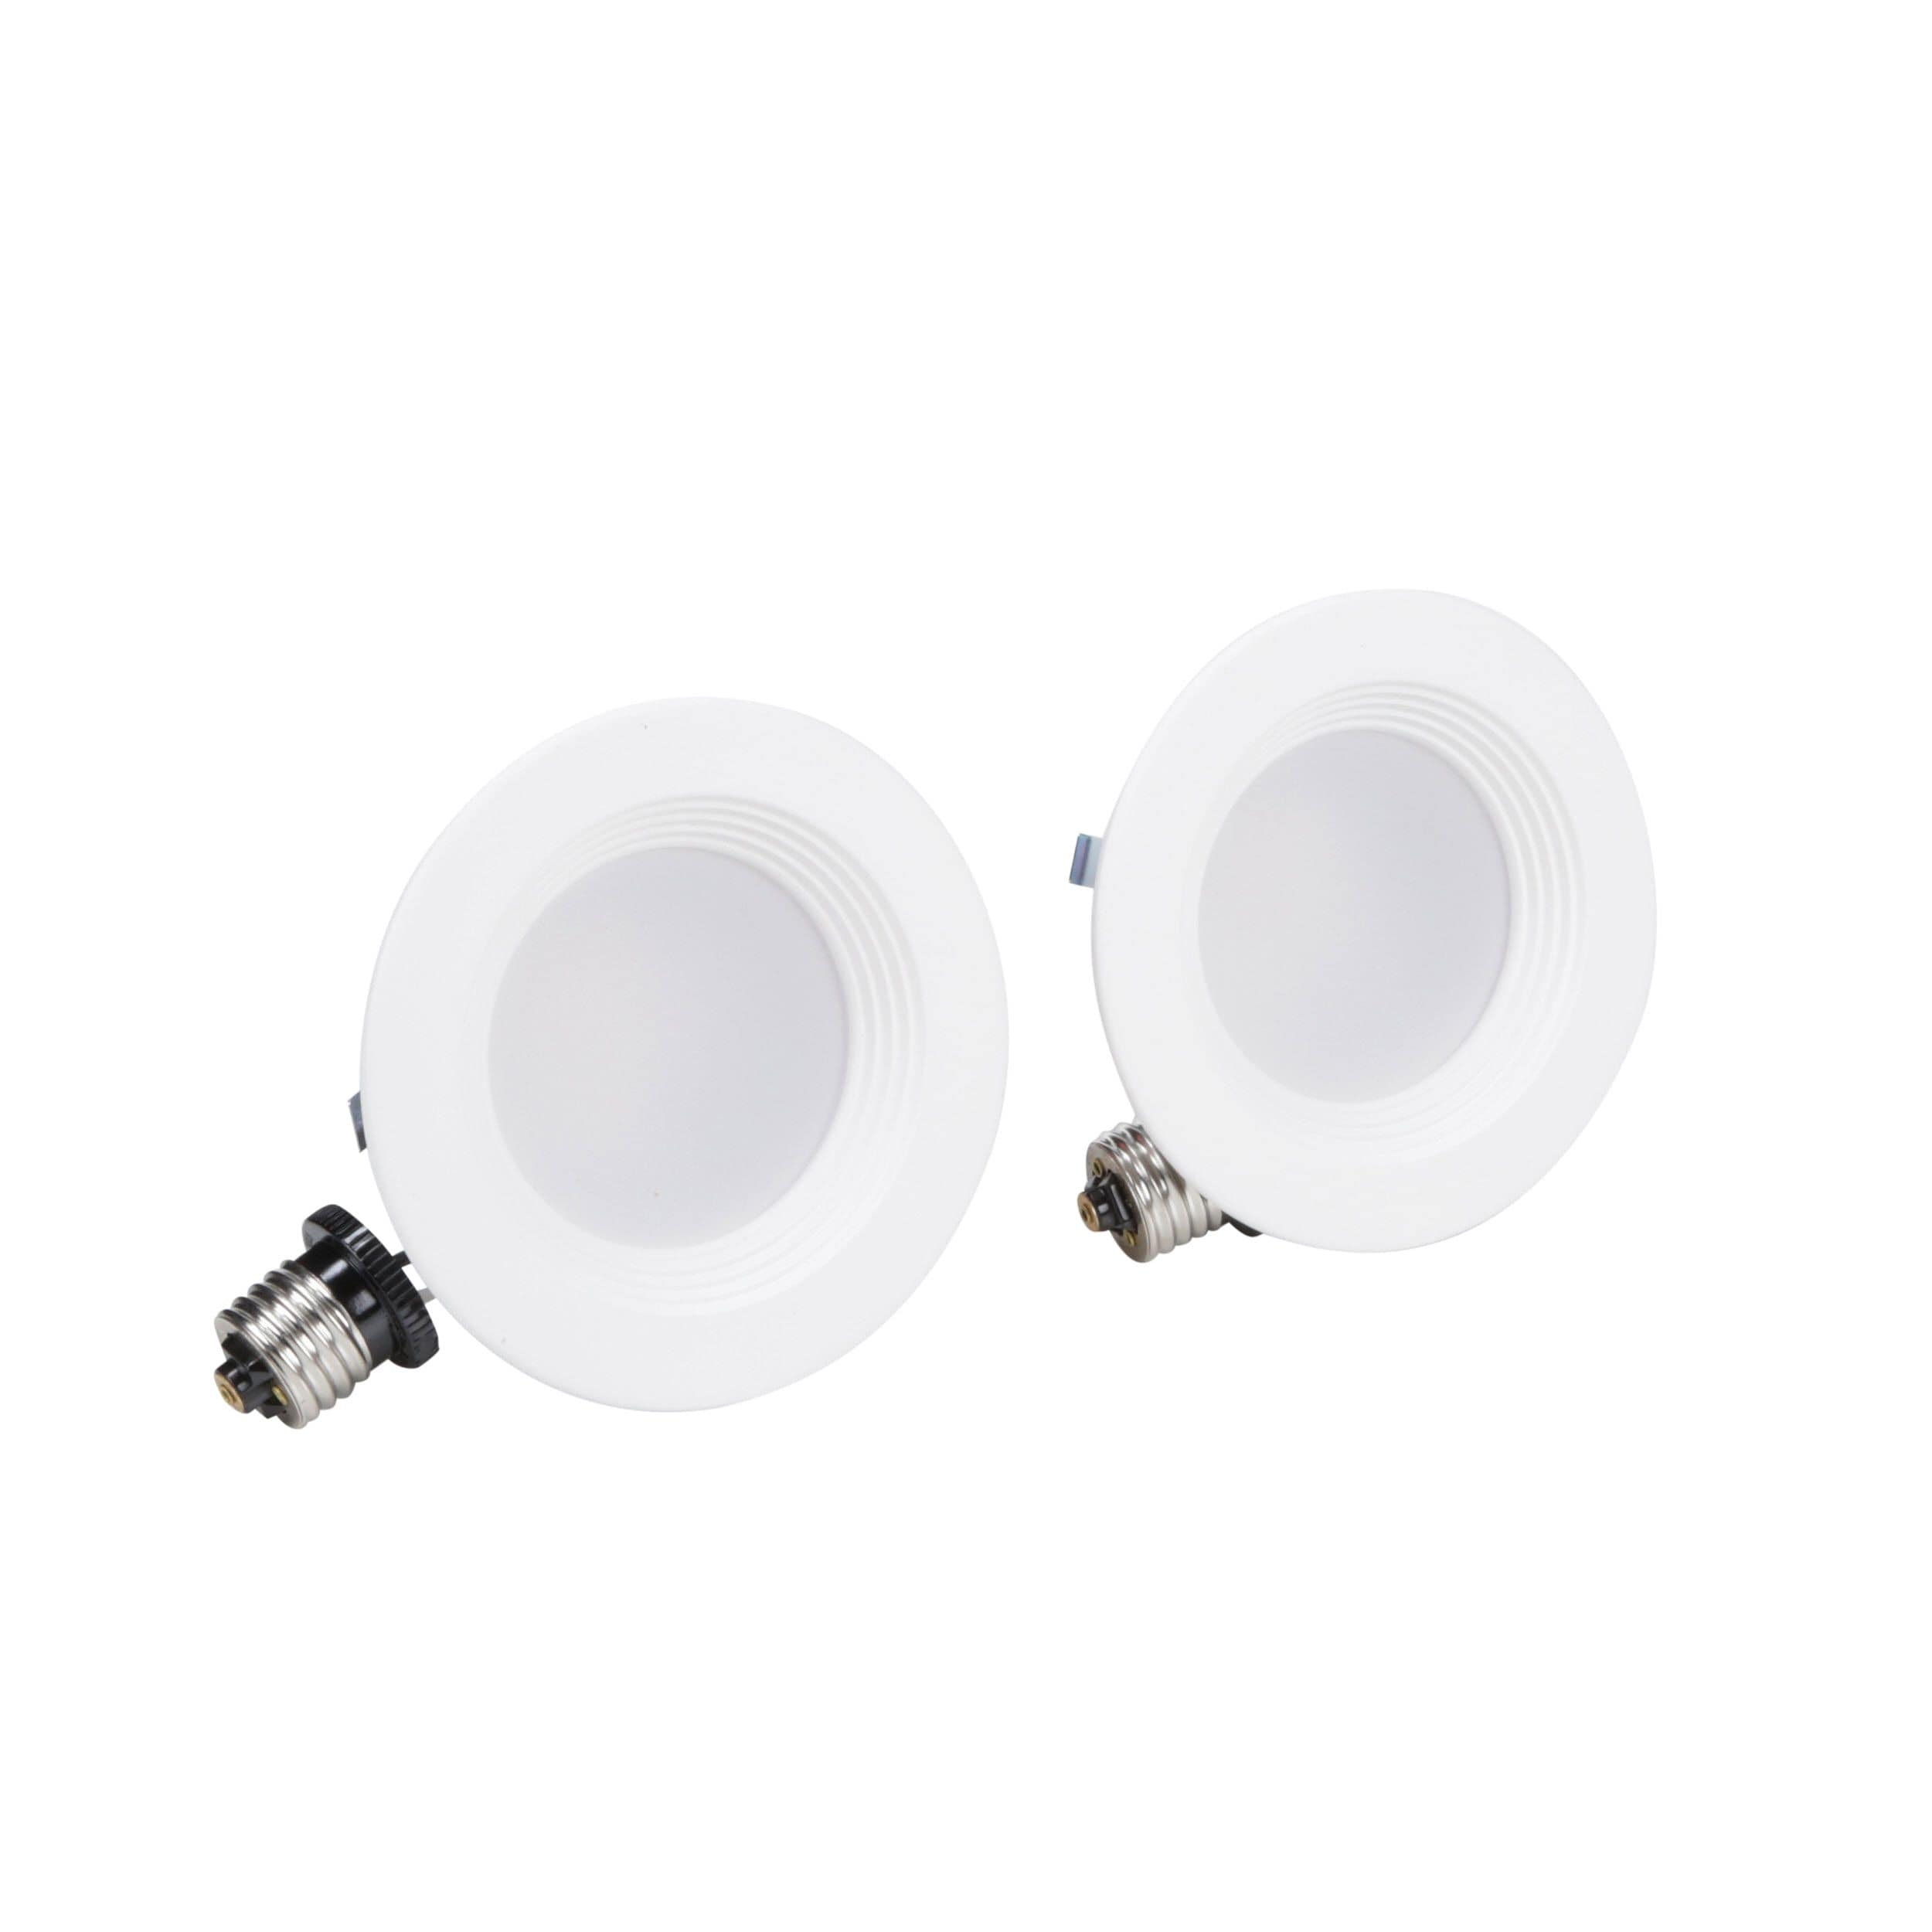 Utilitech 2-Pack 50-Watt Equivalent White LED Recessed Retrofit Downlight Fits Housing Diameter: 4-in Feit Electric Company DLS15-04G27D1E-WH-F2